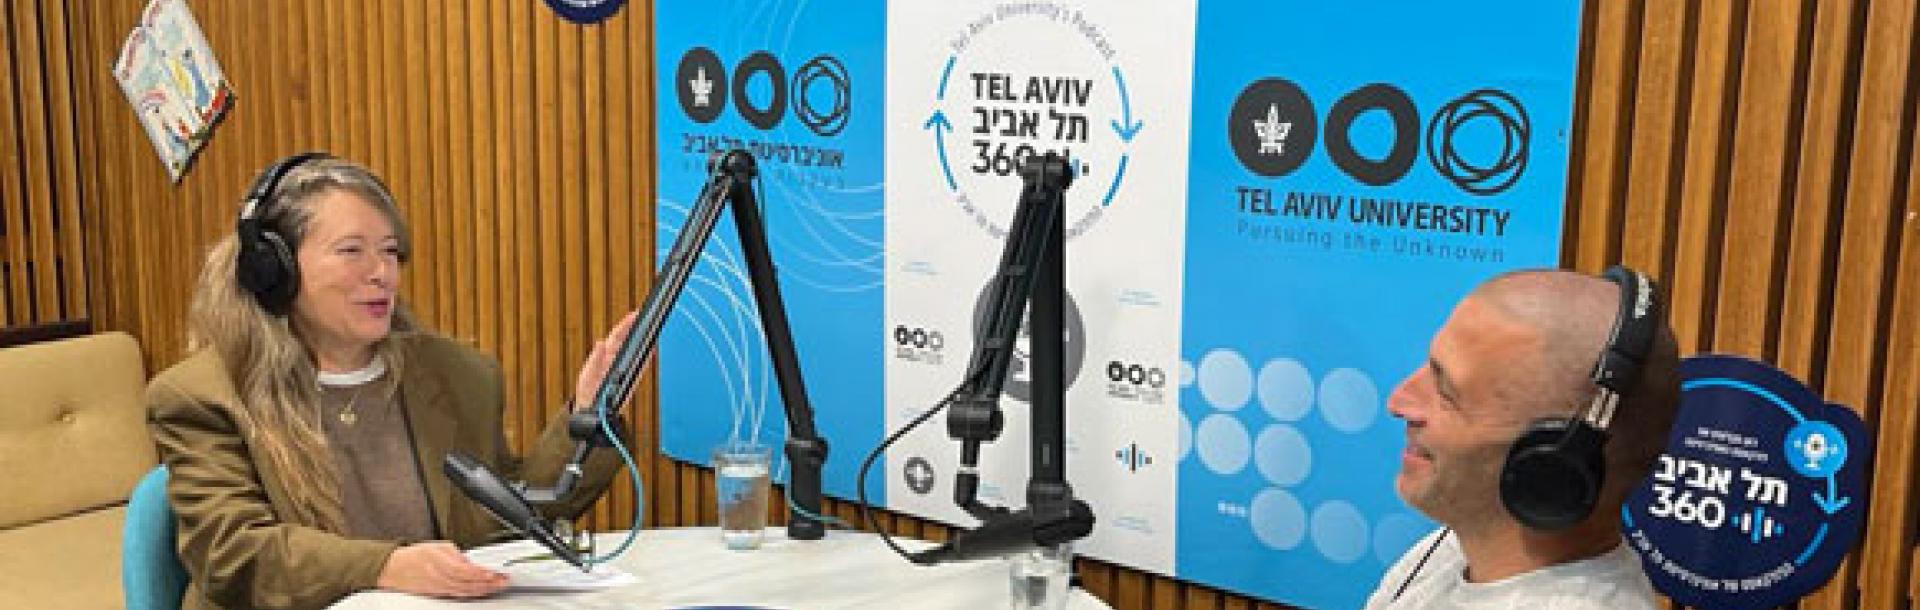 Our recent graduates, Facundo Pereminsky and Joseph K. were featured in a Times of Israel article (link below) about their new venture Camino TLV.